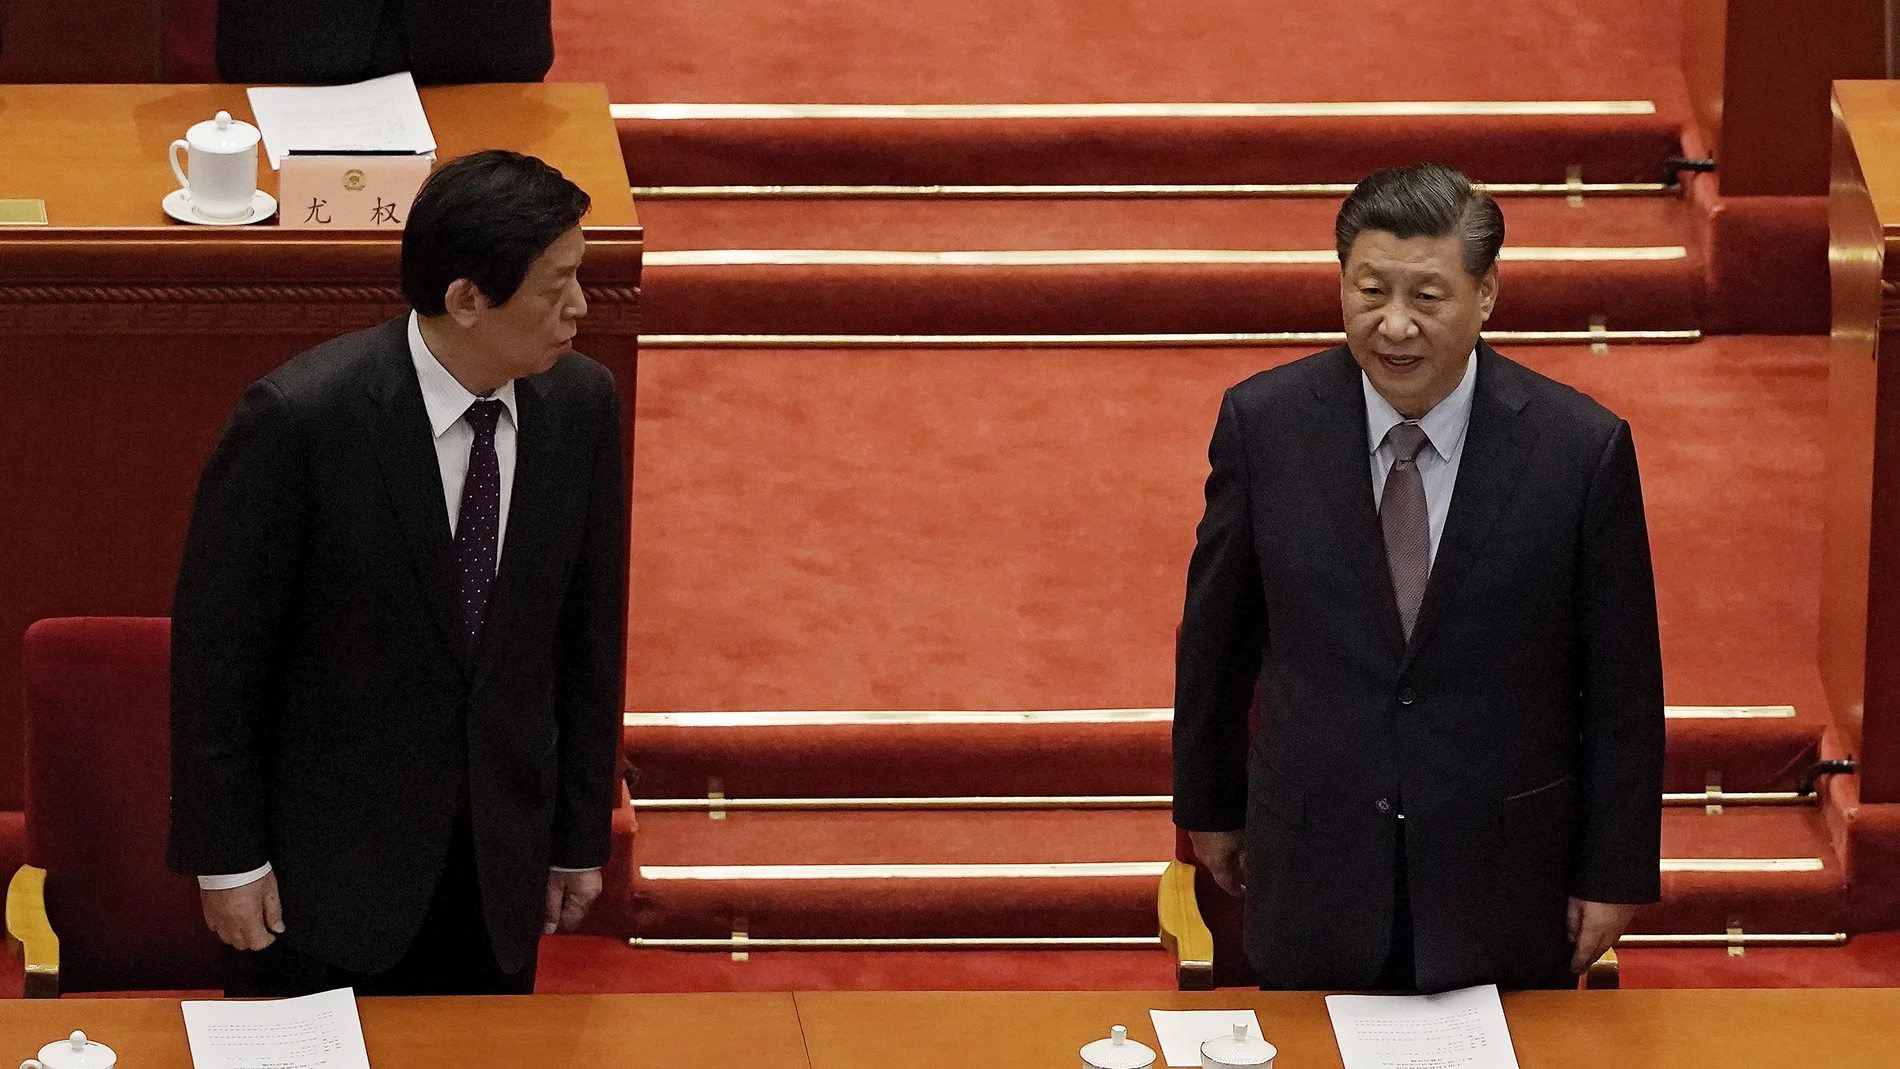 Chinese President Xi Jinping, right, chats with Li Zhanshu, Chairman of National People's Congress, as they arrive for the opening session of Chinese People's Political Consultative Conference (CPPCC) at the Great Hall of the People in Beijing, Thursday, March 4, 2021. (AP Photo/Andy Wong)